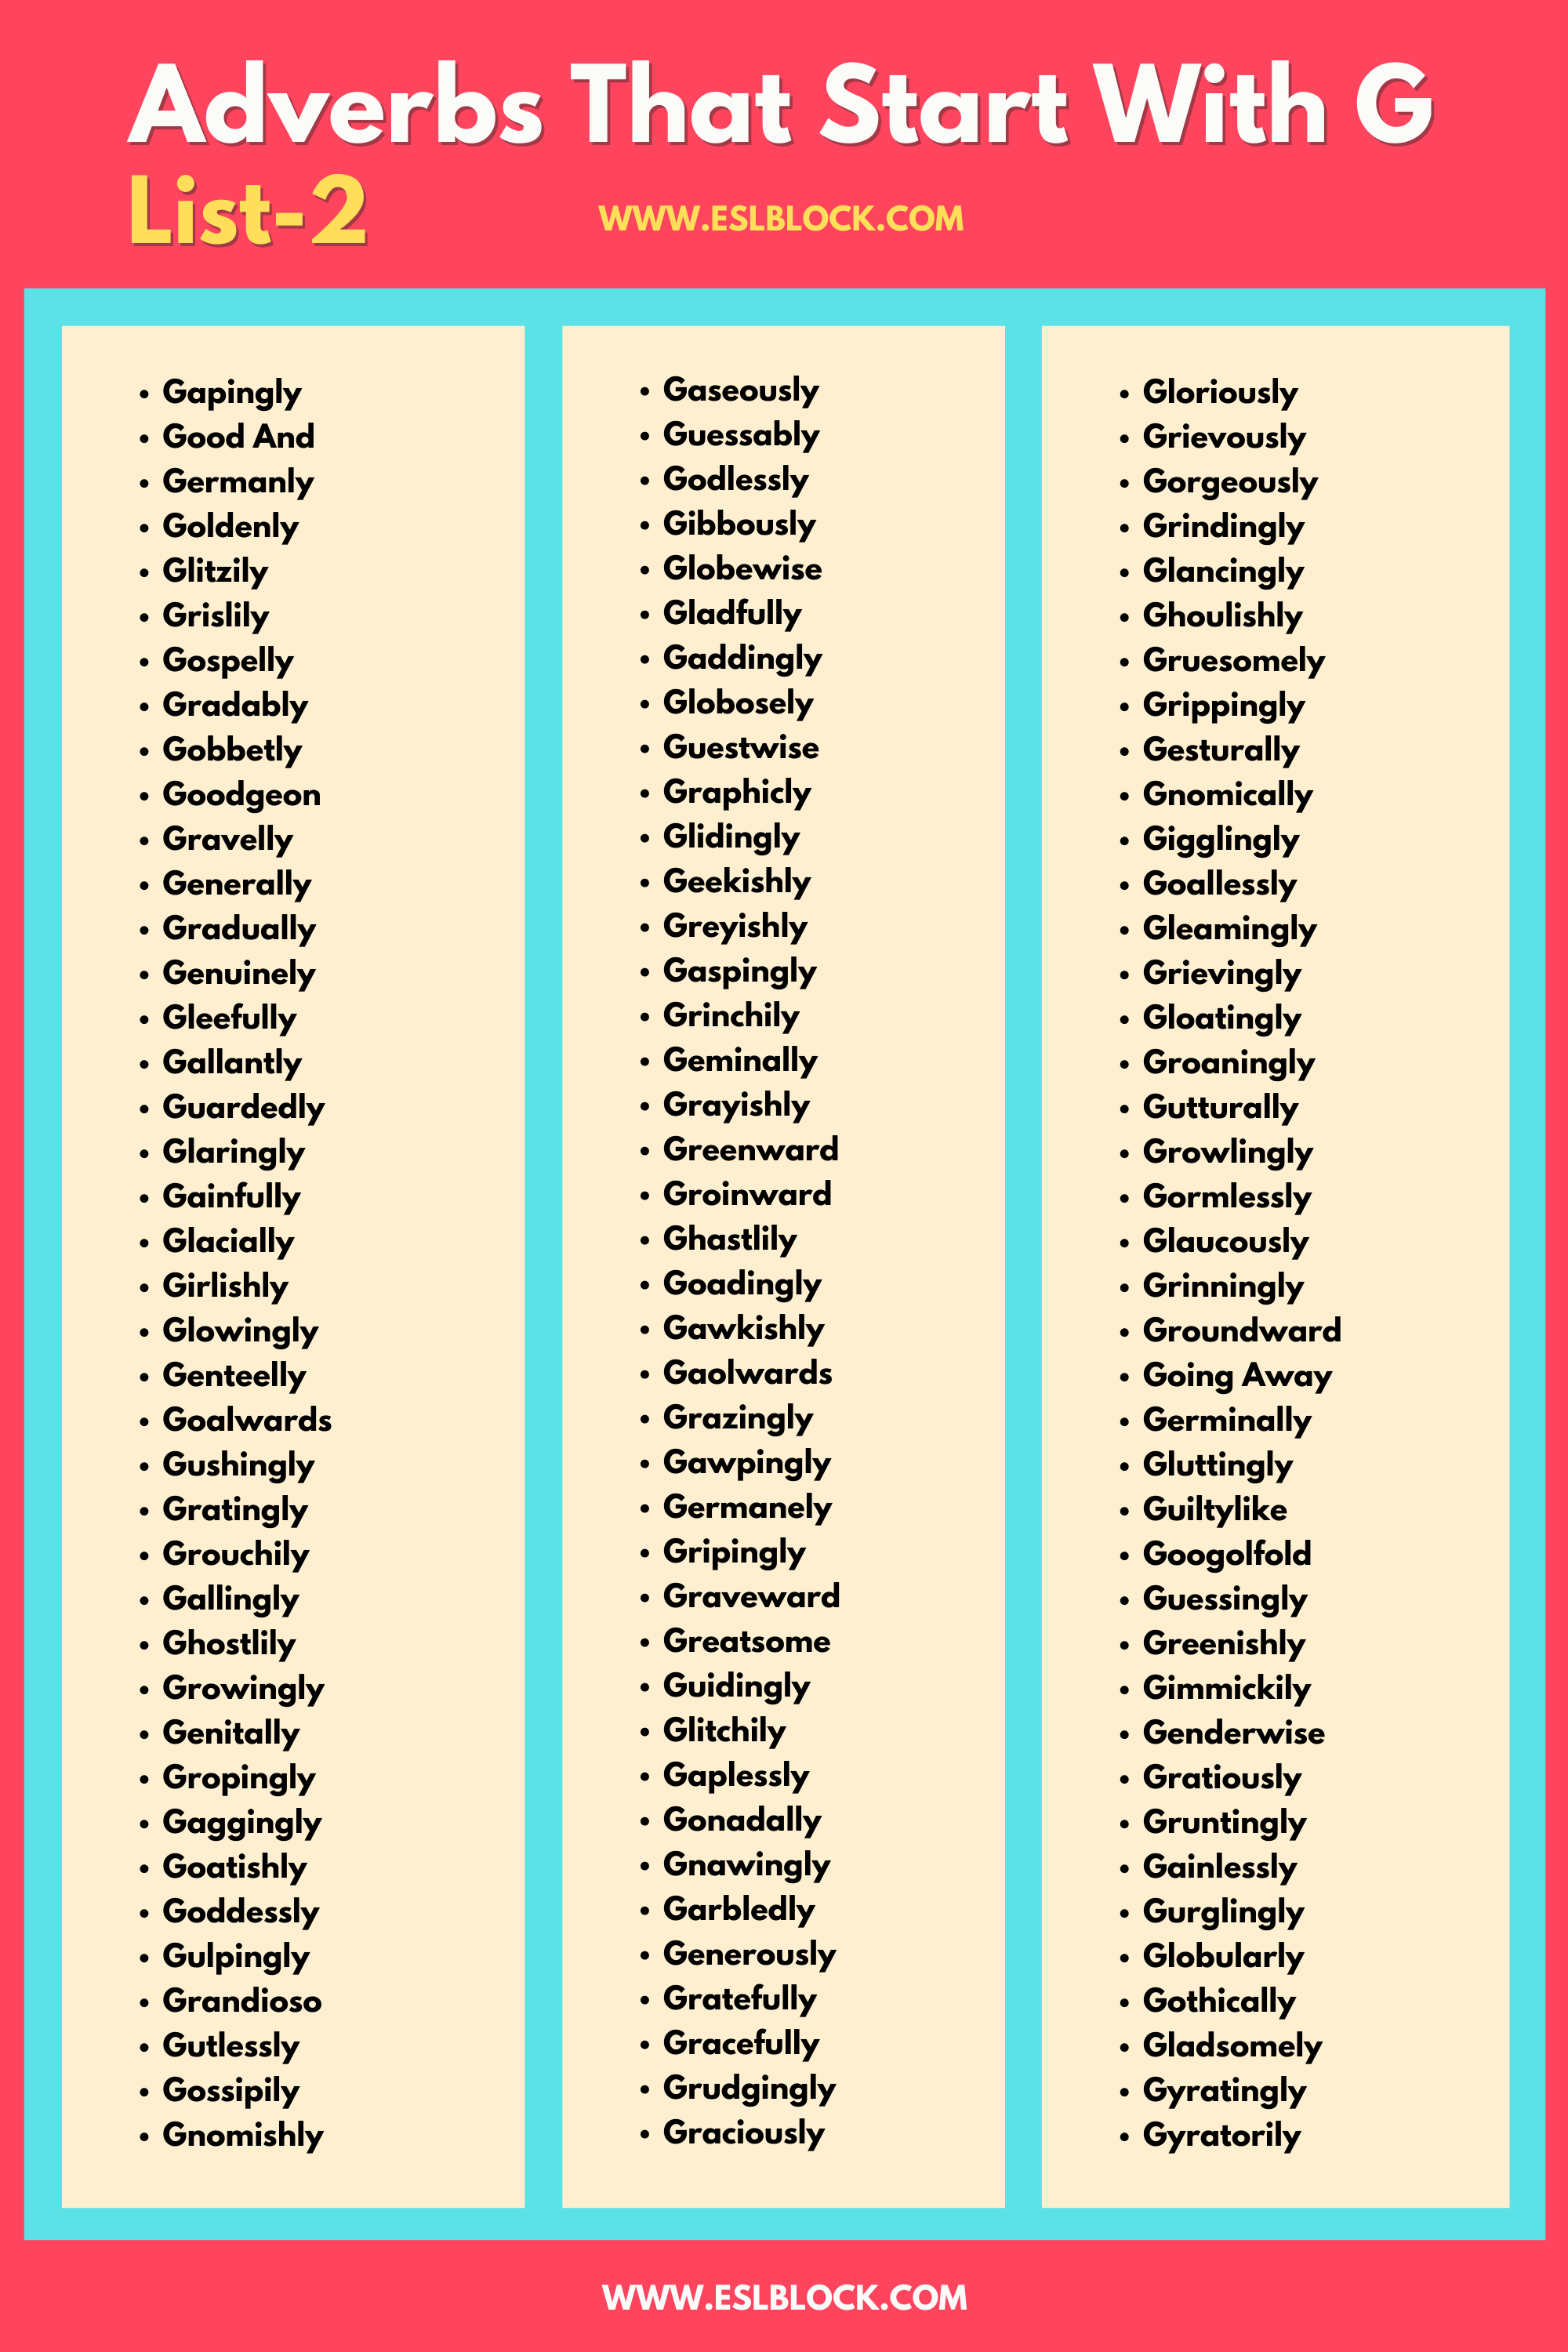 100 Example Sentences Using Adverbs, 4 Letter Adverbs That Start with G, 4 Letter Words, 5 Letter Adverbs That Start with G, 5 Letter Words, 6 Letter Adverbs That Start with G, 6 Letter Words, A to Z Adverbs, AA Adverbs, Adverb vocabulary words, Adverbs, Adverbs That Start with G, Adverbs with Example Sentences, All Adverbs, Types of Adverbs, Types of Adverbs with Example Sentences, Vocabulary, What are Adverbs, What are the types of Adverbs, Words That with G